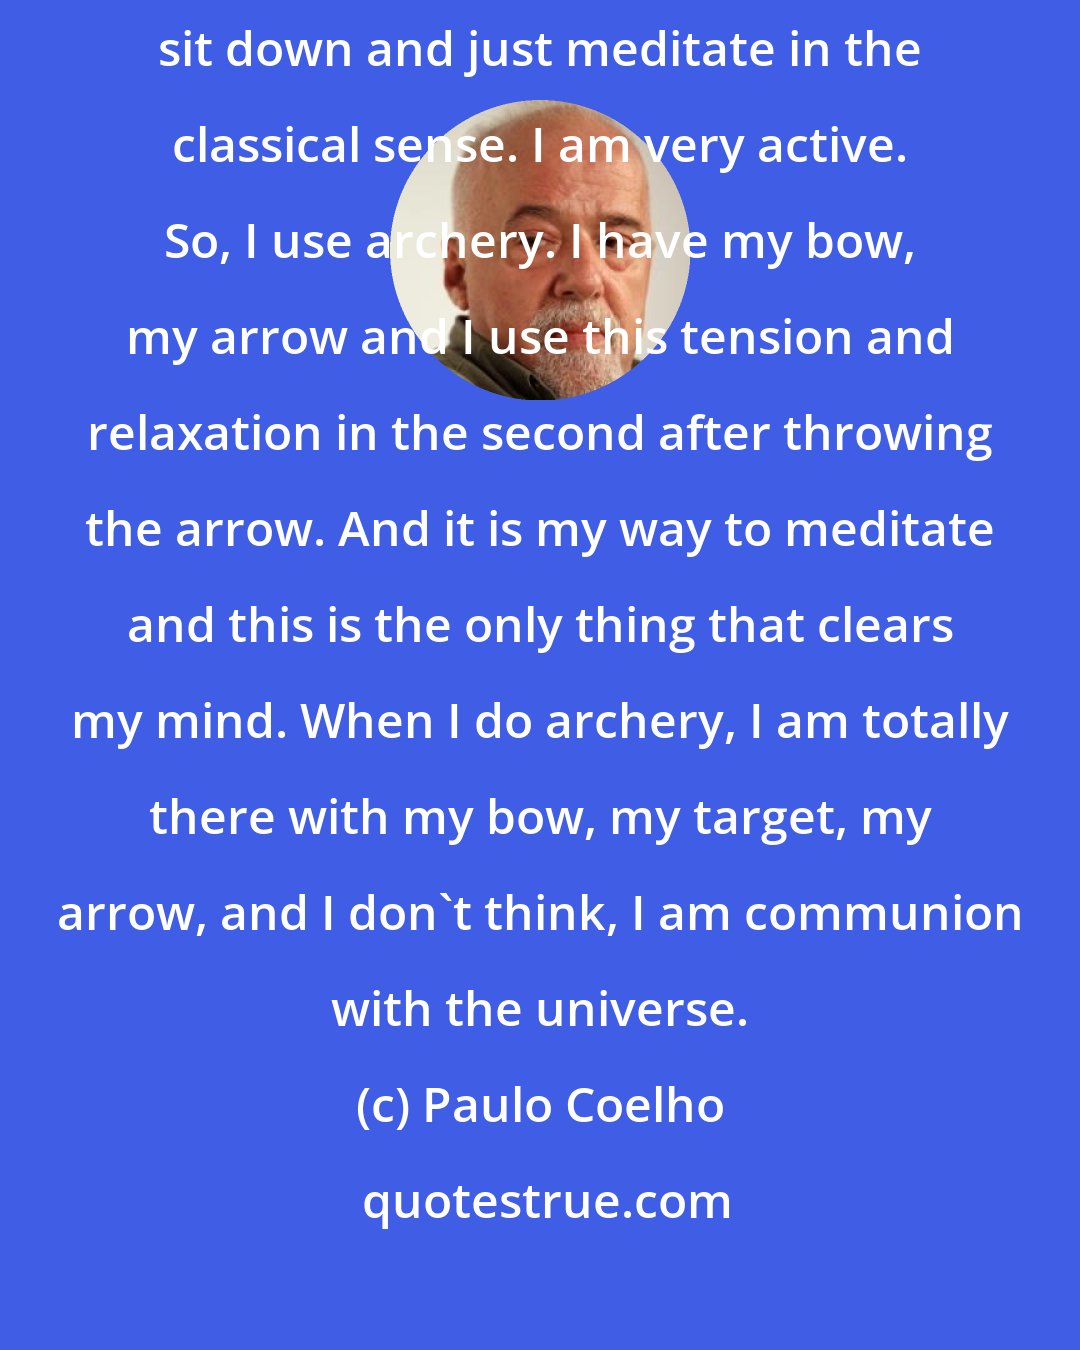 Paulo Coelho: I am a very good archer. I use archery as my way of meditation. I cannot sit down and just meditate in the classical sense. I am very active. So, I use archery. I have my bow, my arrow and I use this tension and relaxation in the second after throwing the arrow. And it is my way to meditate and this is the only thing that clears my mind. When I do archery, I am totally there with my bow, my target, my arrow, and I don't think, I am communion with the universe.